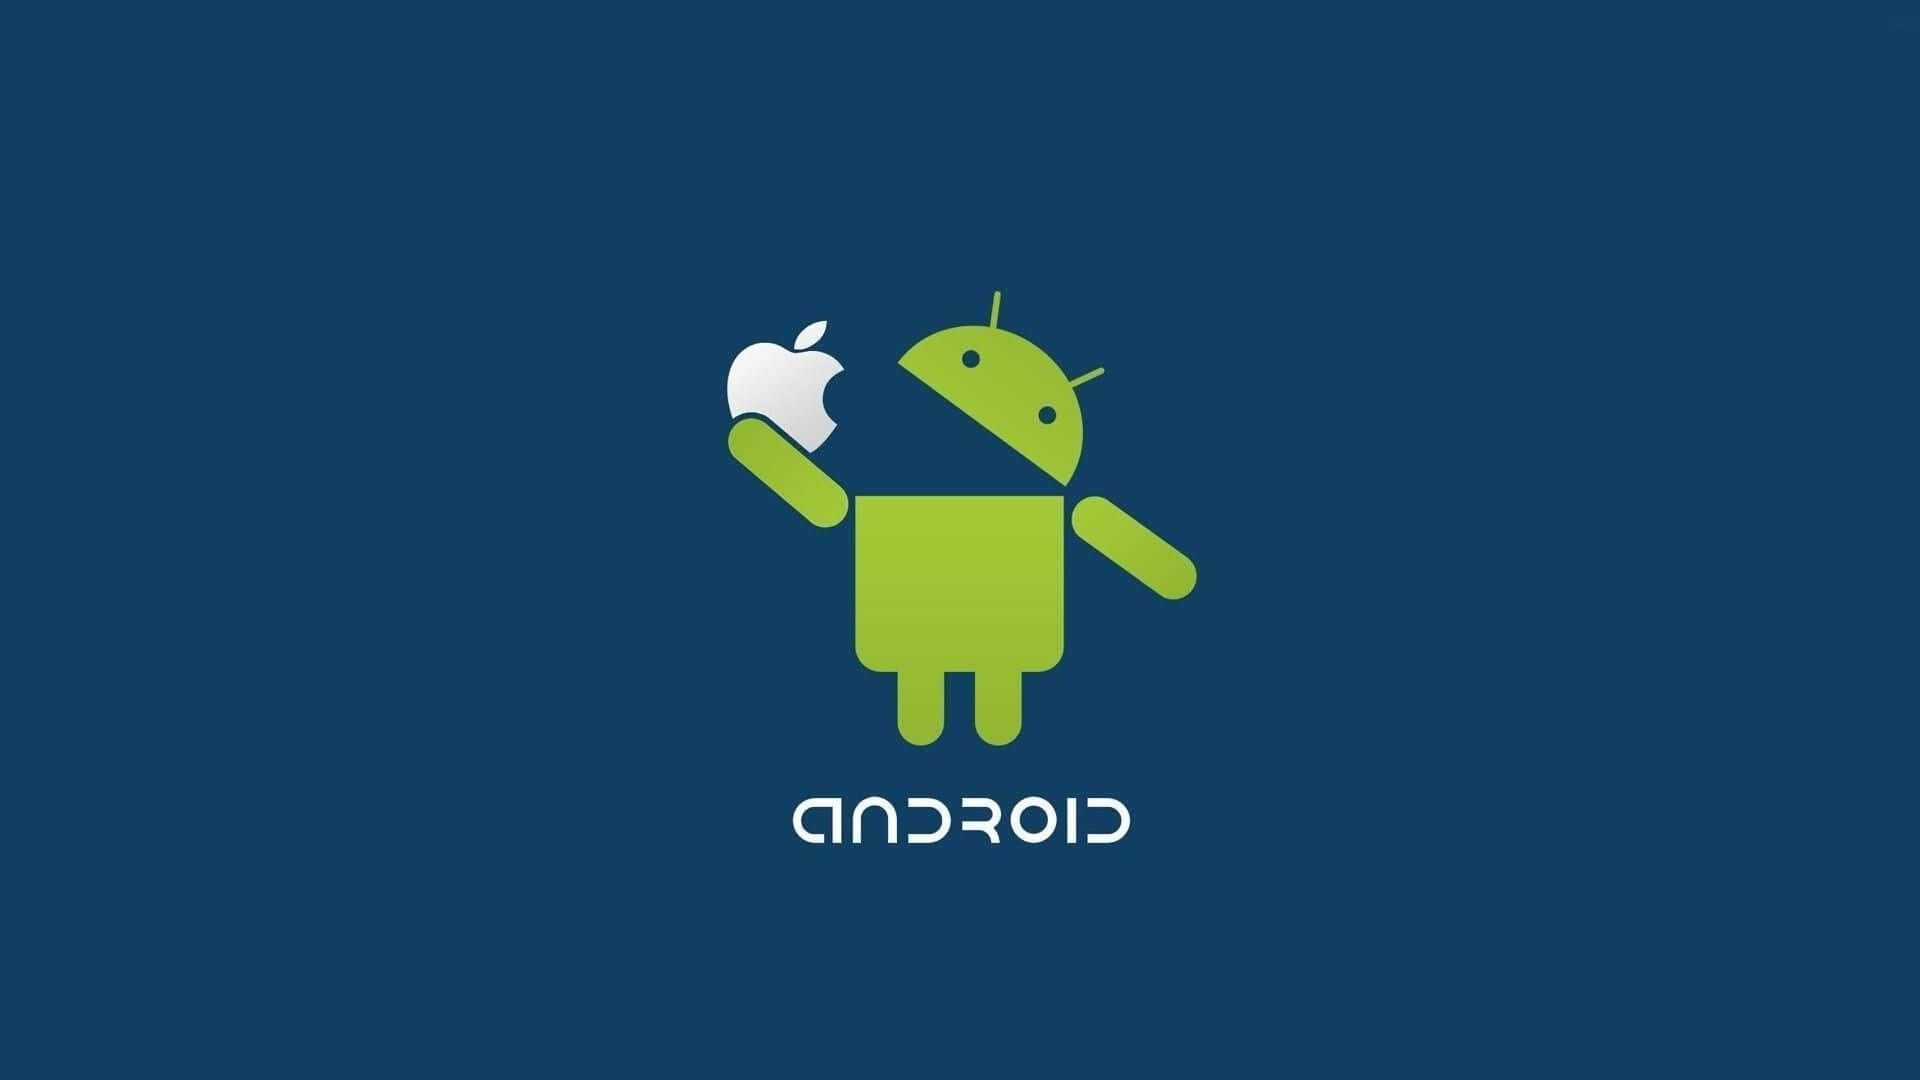 "Apple Dominates Android" Wallpaper